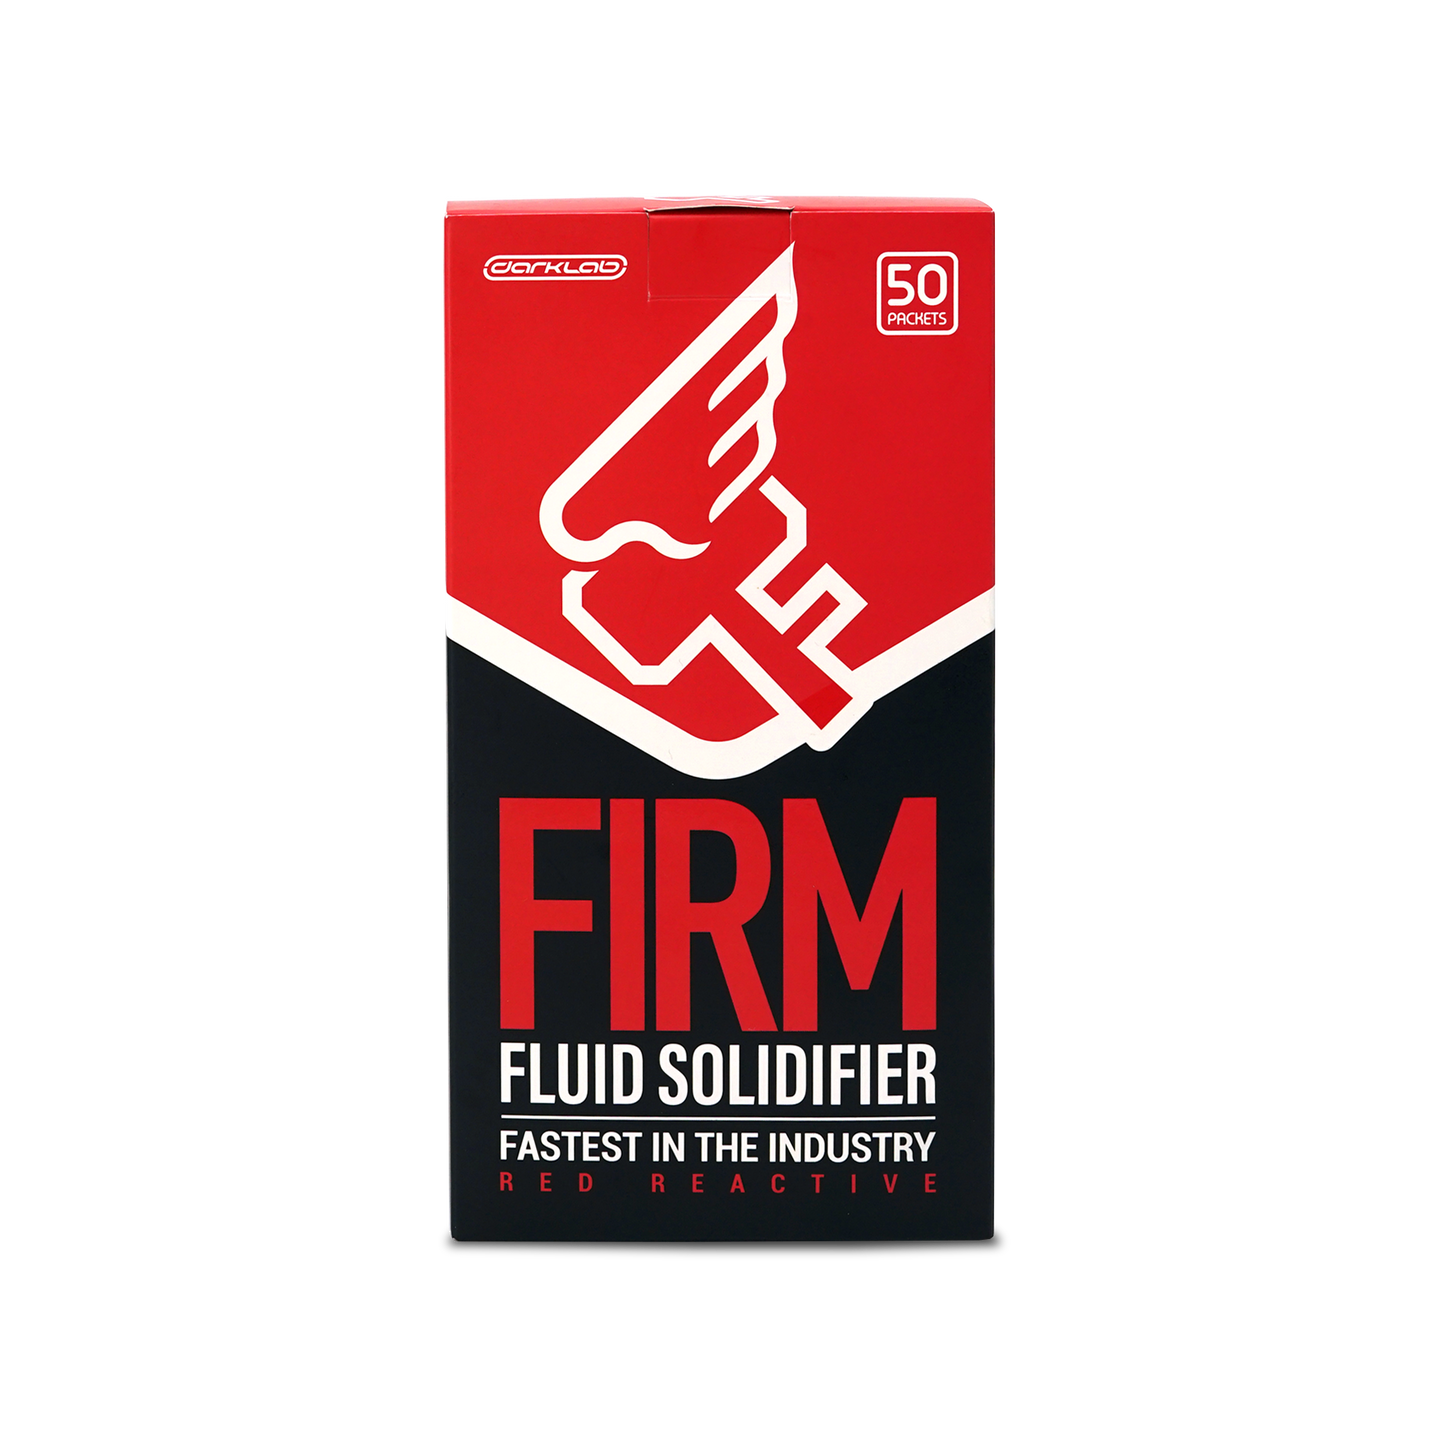 FIRM FLUID SOLIDIFIER 50 PACK BOX (RED)